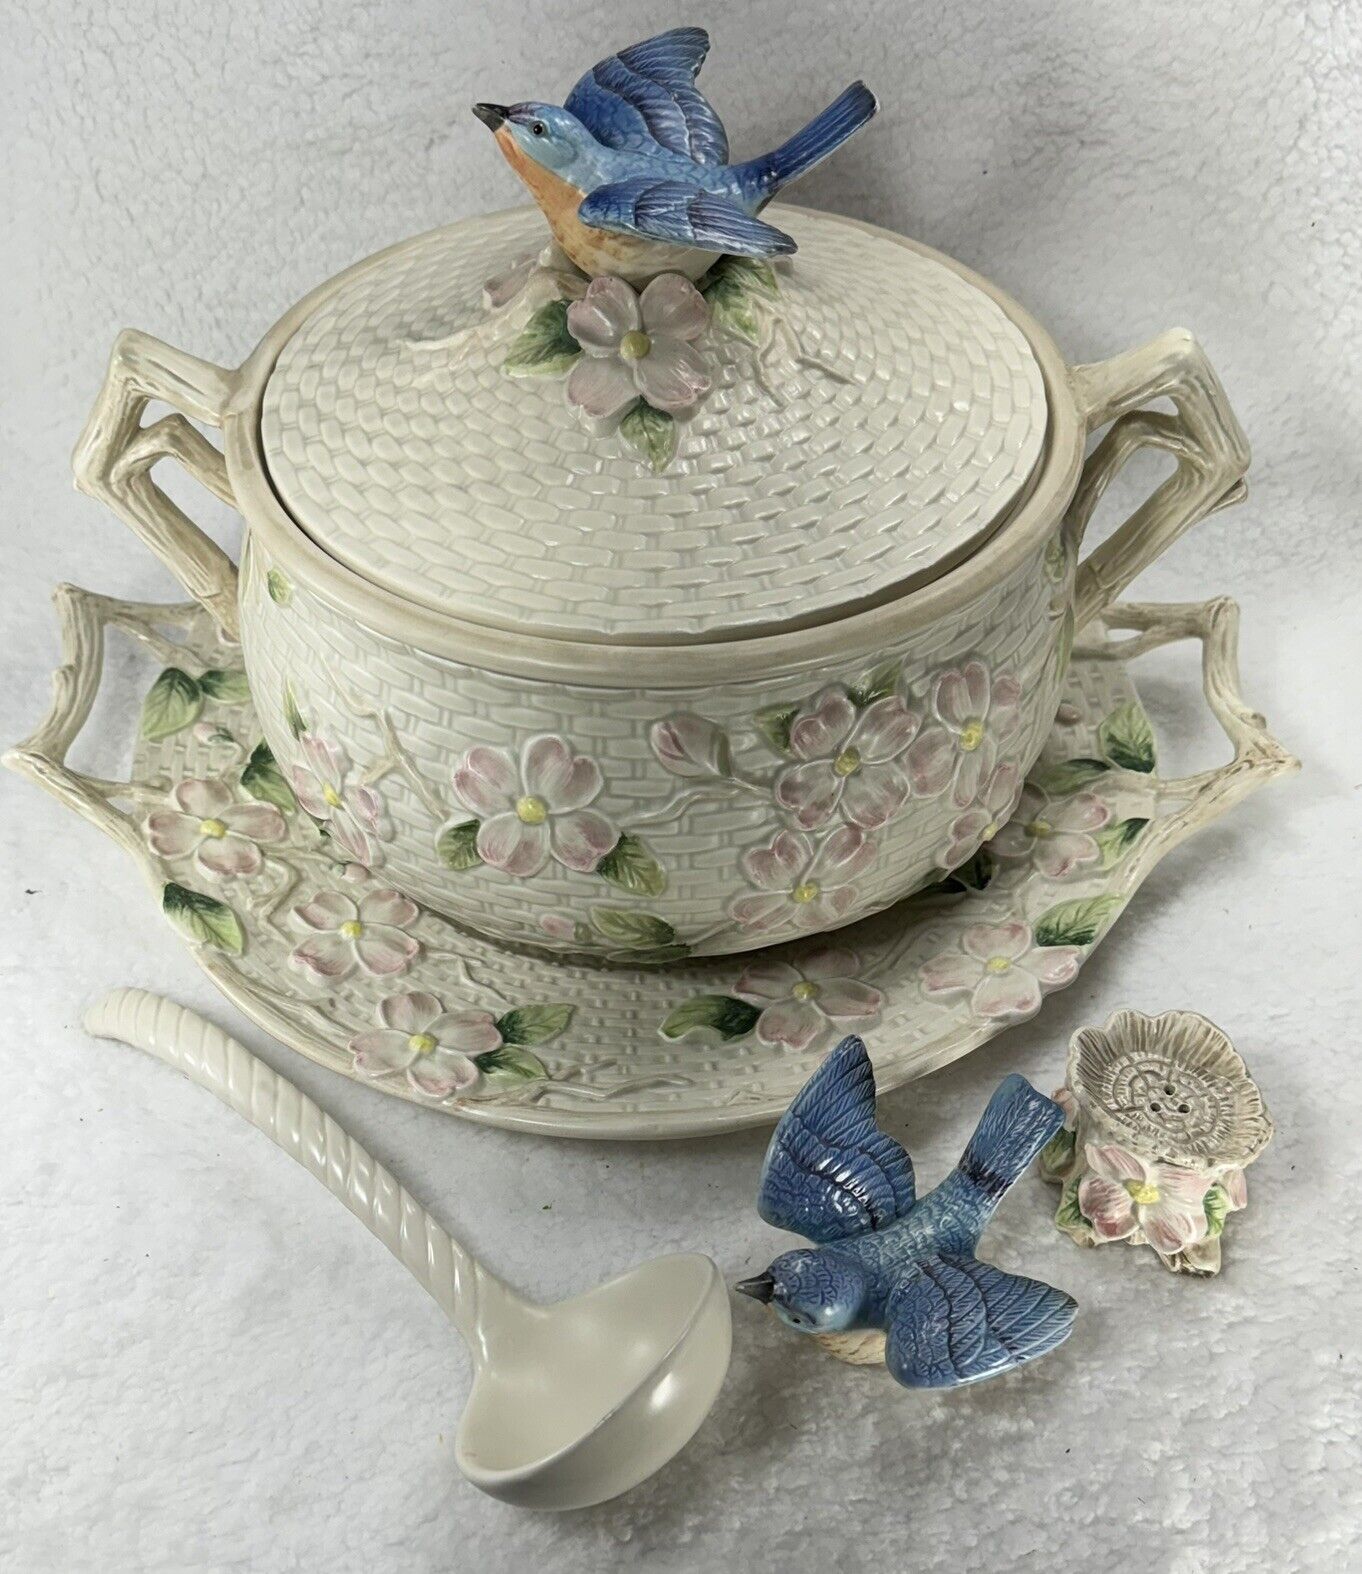 1990 Fitz & Floyd Bluebird & Pink Dogwood Blossom Tureen With Plate S+P & Spoon